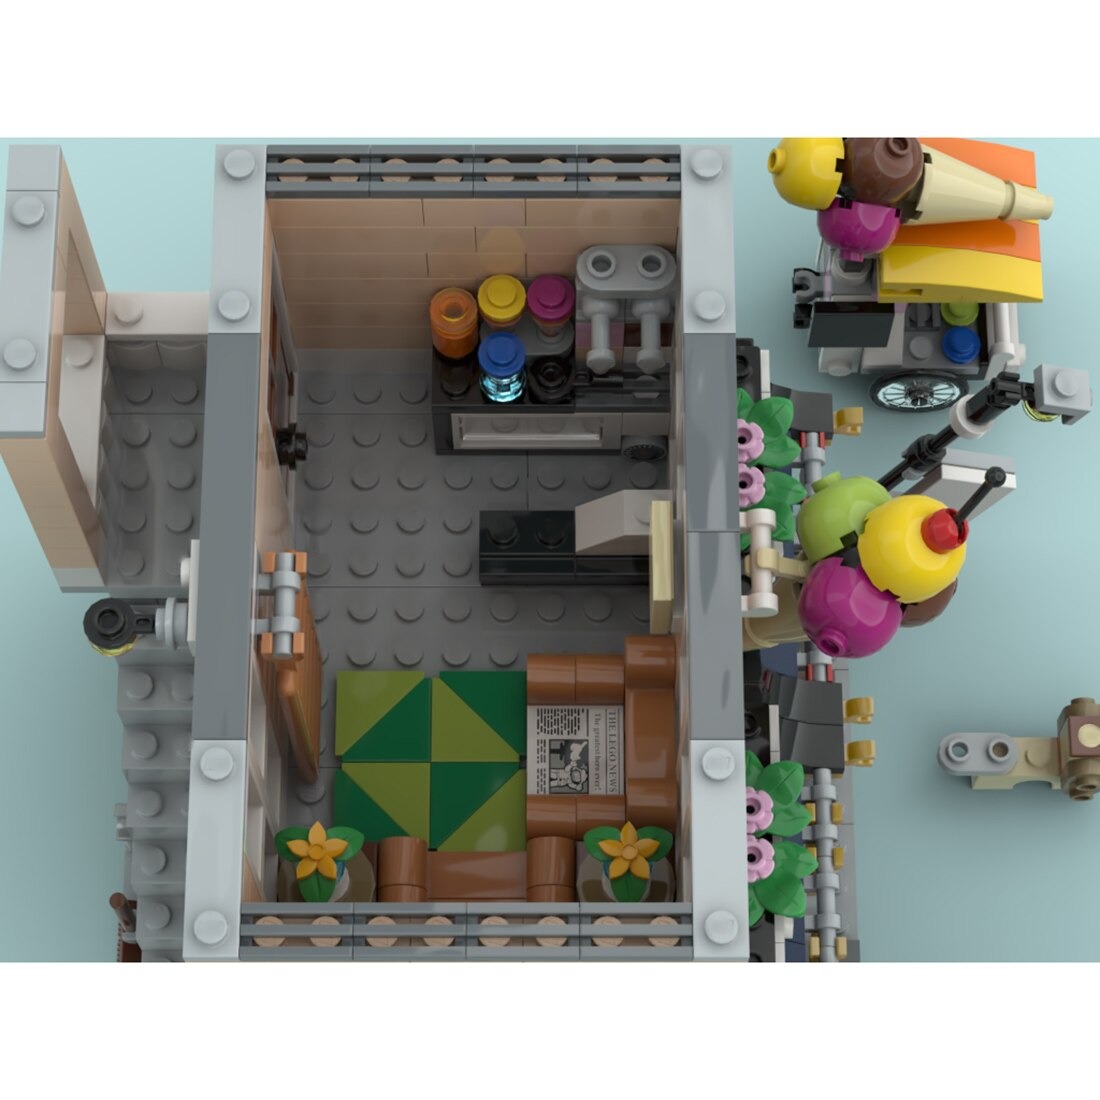 Modular Building MOC-113478 Ice Cream & Noodle Store Street View MOCBRICKLAND